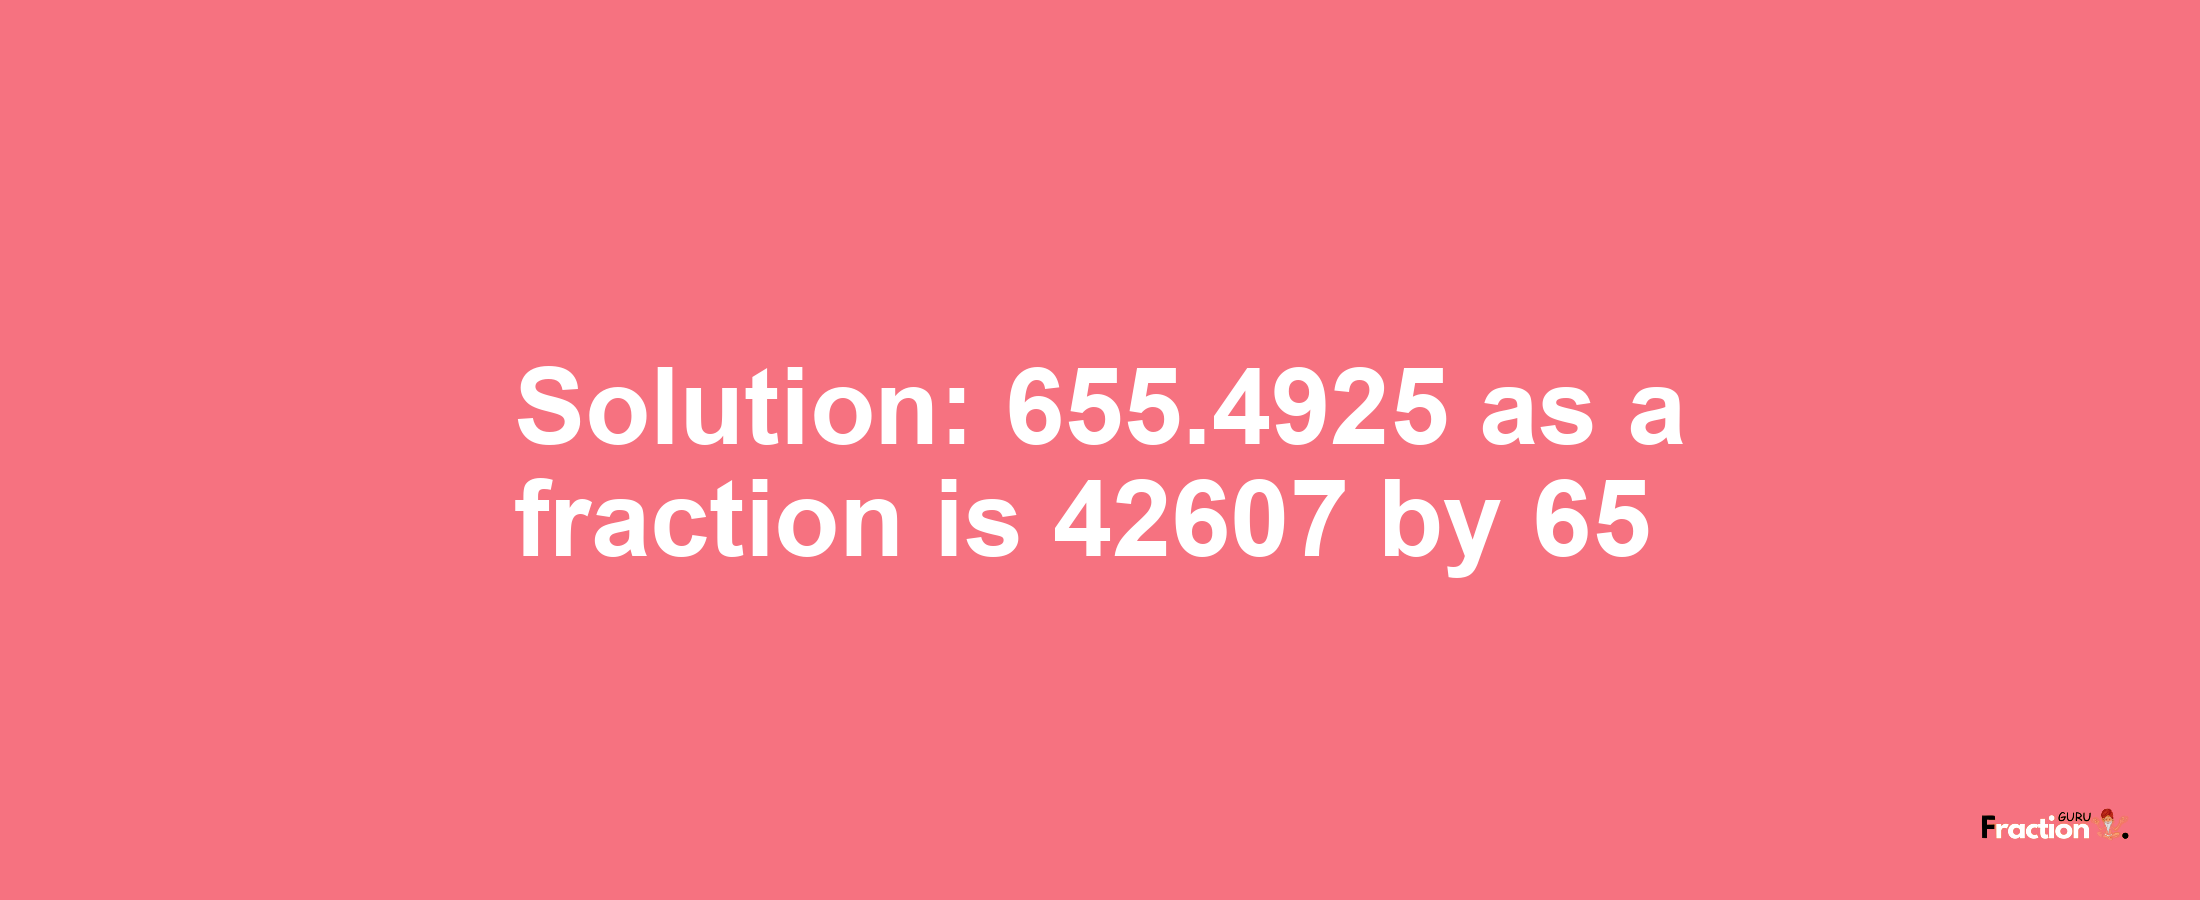 Solution:655.4925 as a fraction is 42607/65